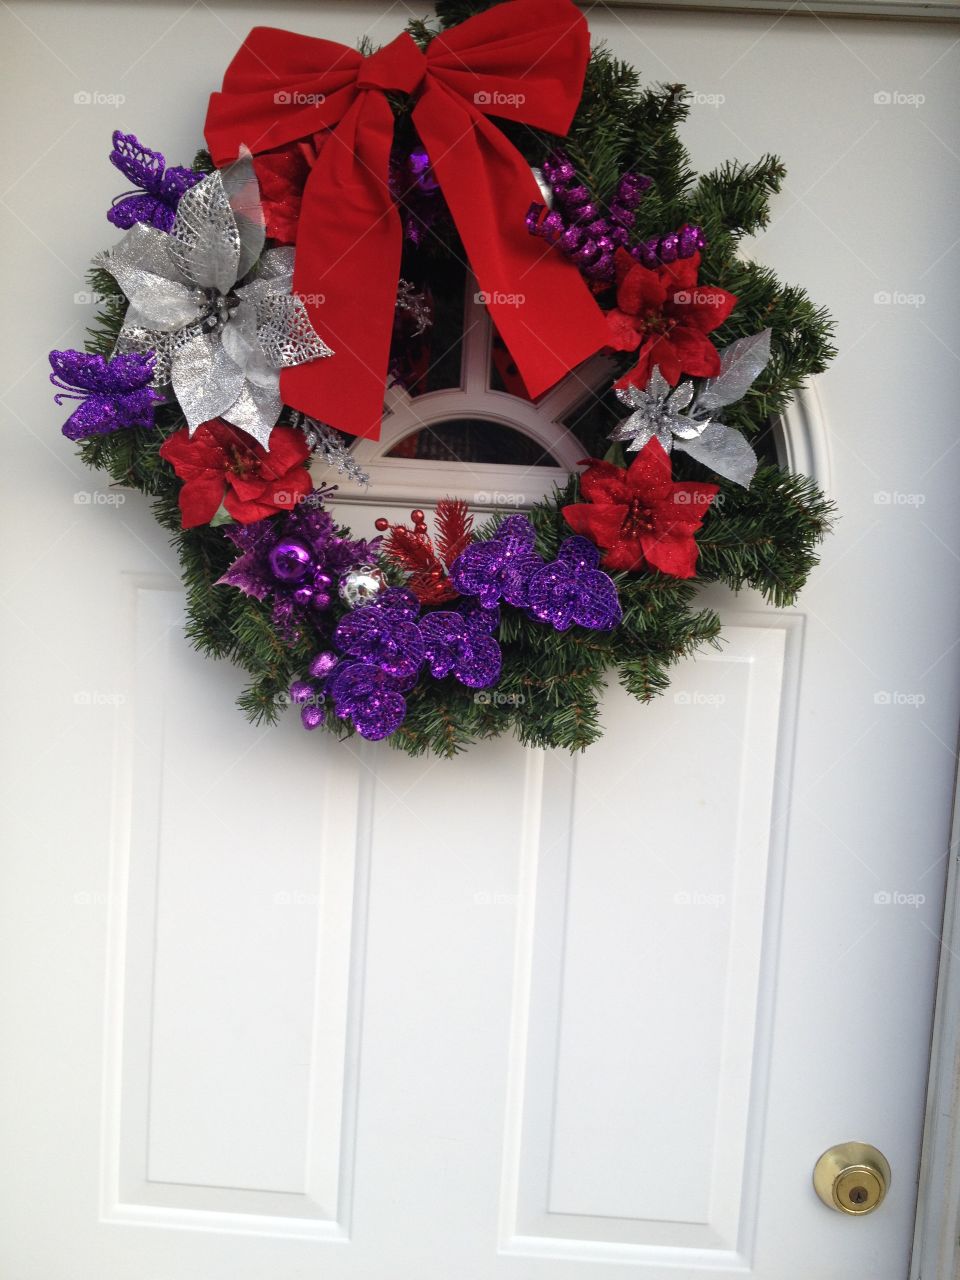 Door decoration given by a friend